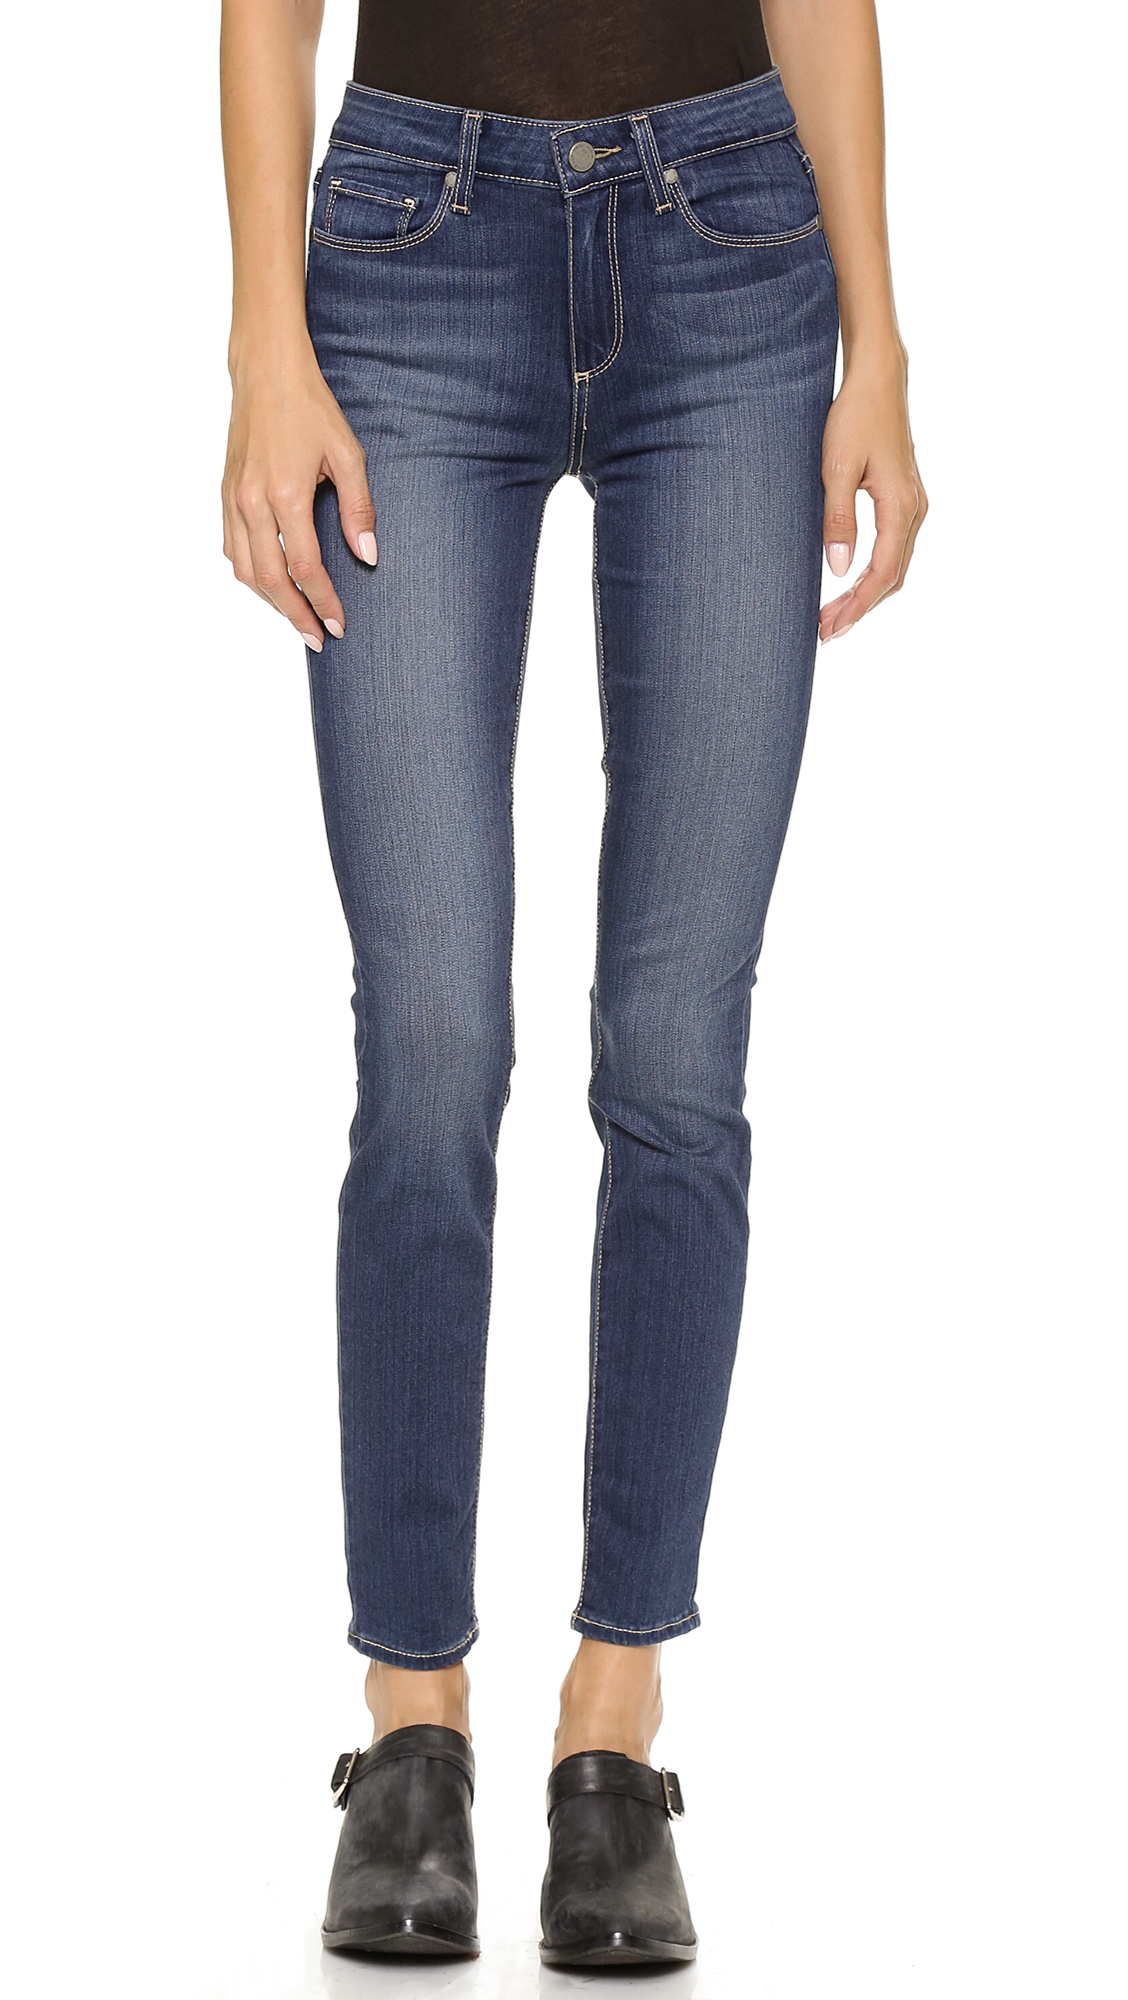 Lyst - Paige Hoxton Ultra Skinny Jeans Easton in Blue